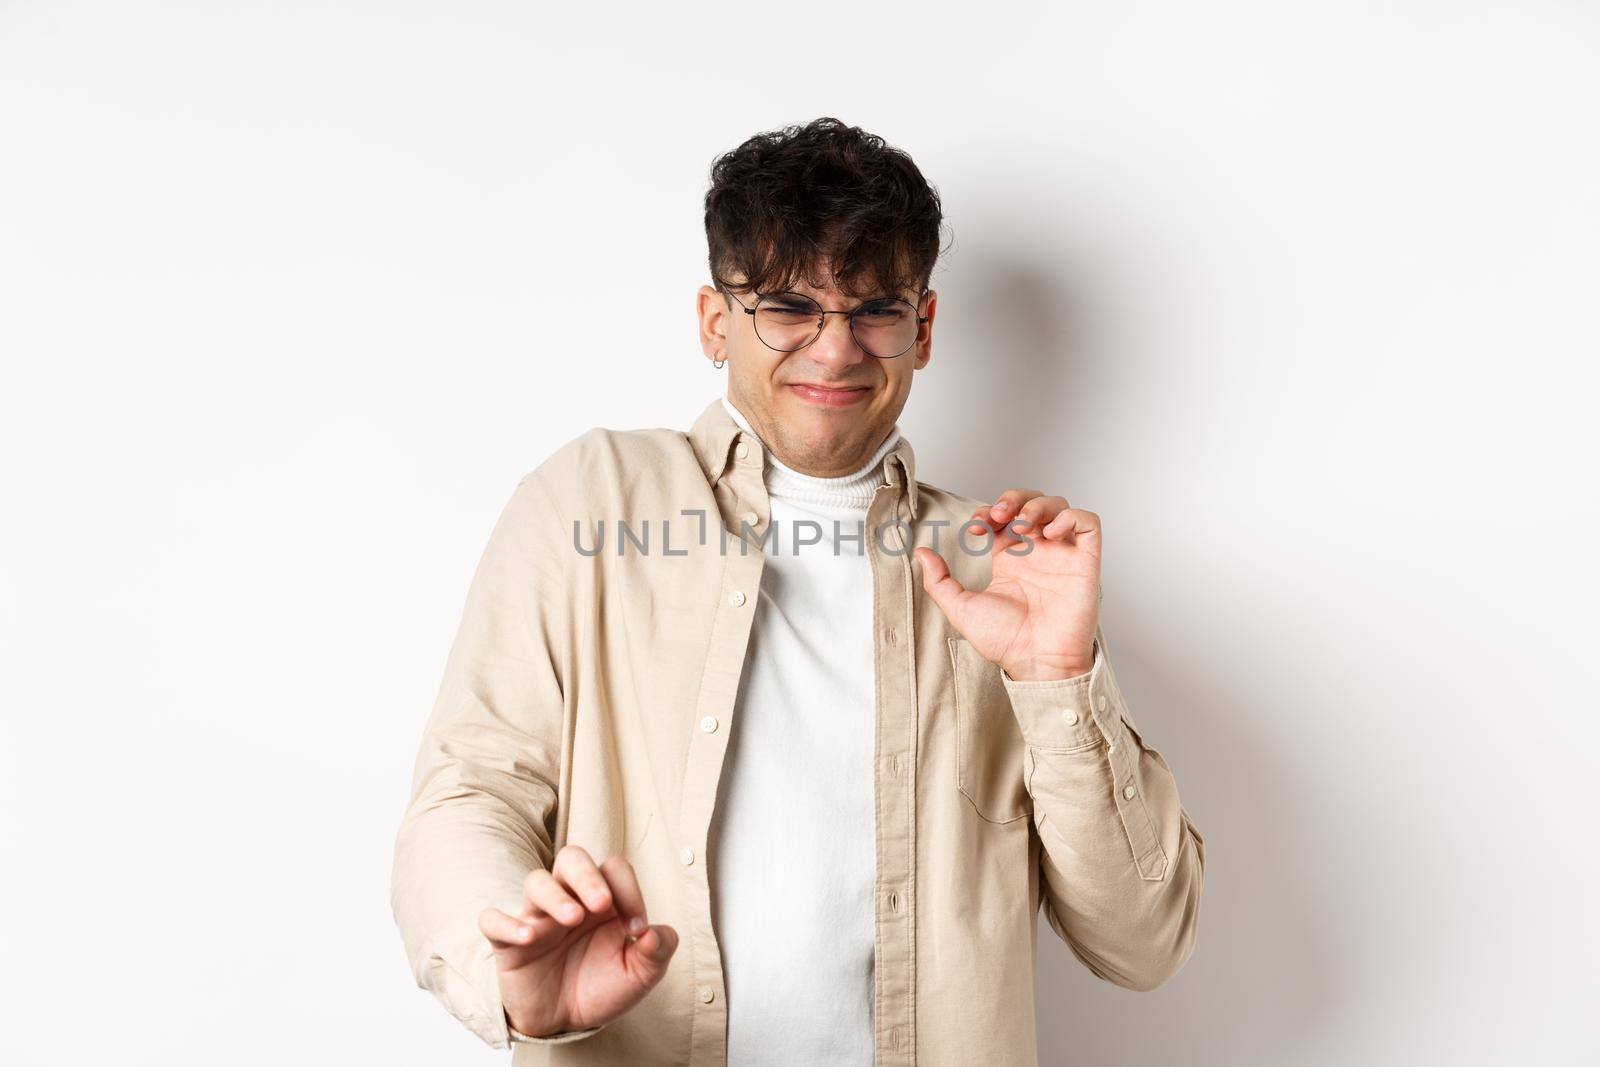 Disgusted guy grimacing and jumping away from something nasty, stare with aversion and dislike, rejecting bad offer, standing on white background.